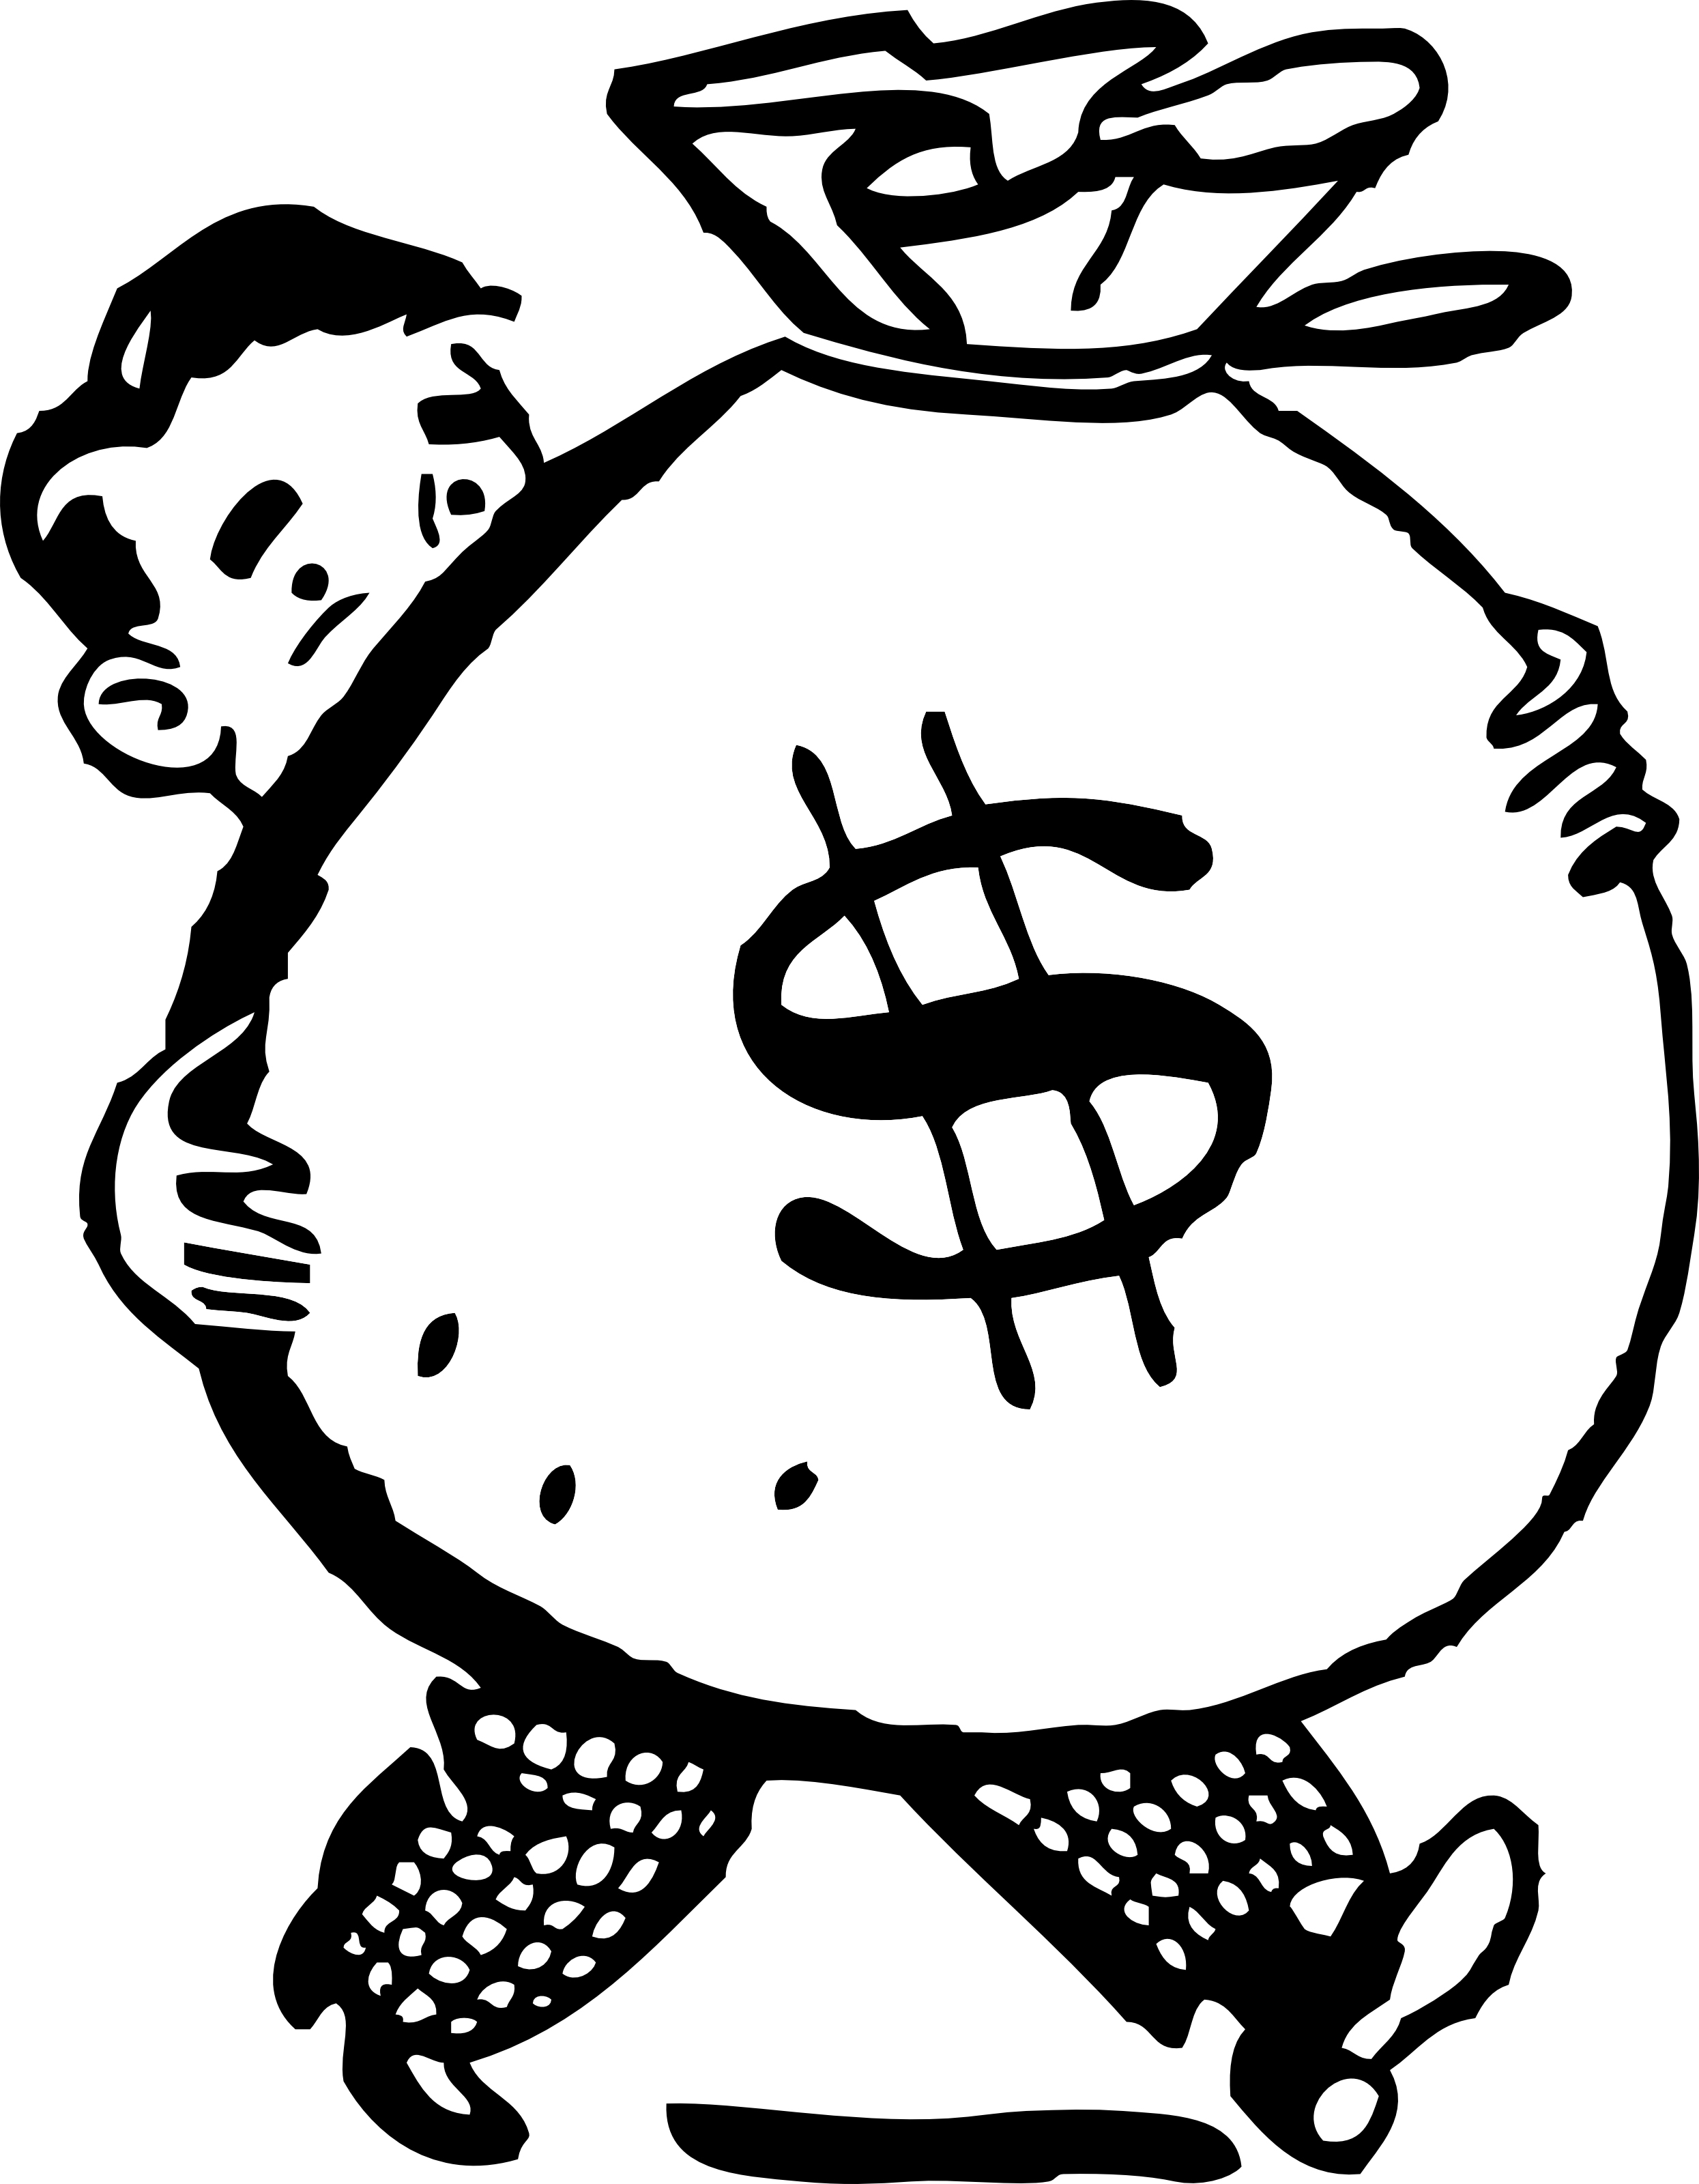 Dollar sign black and white clipart kid